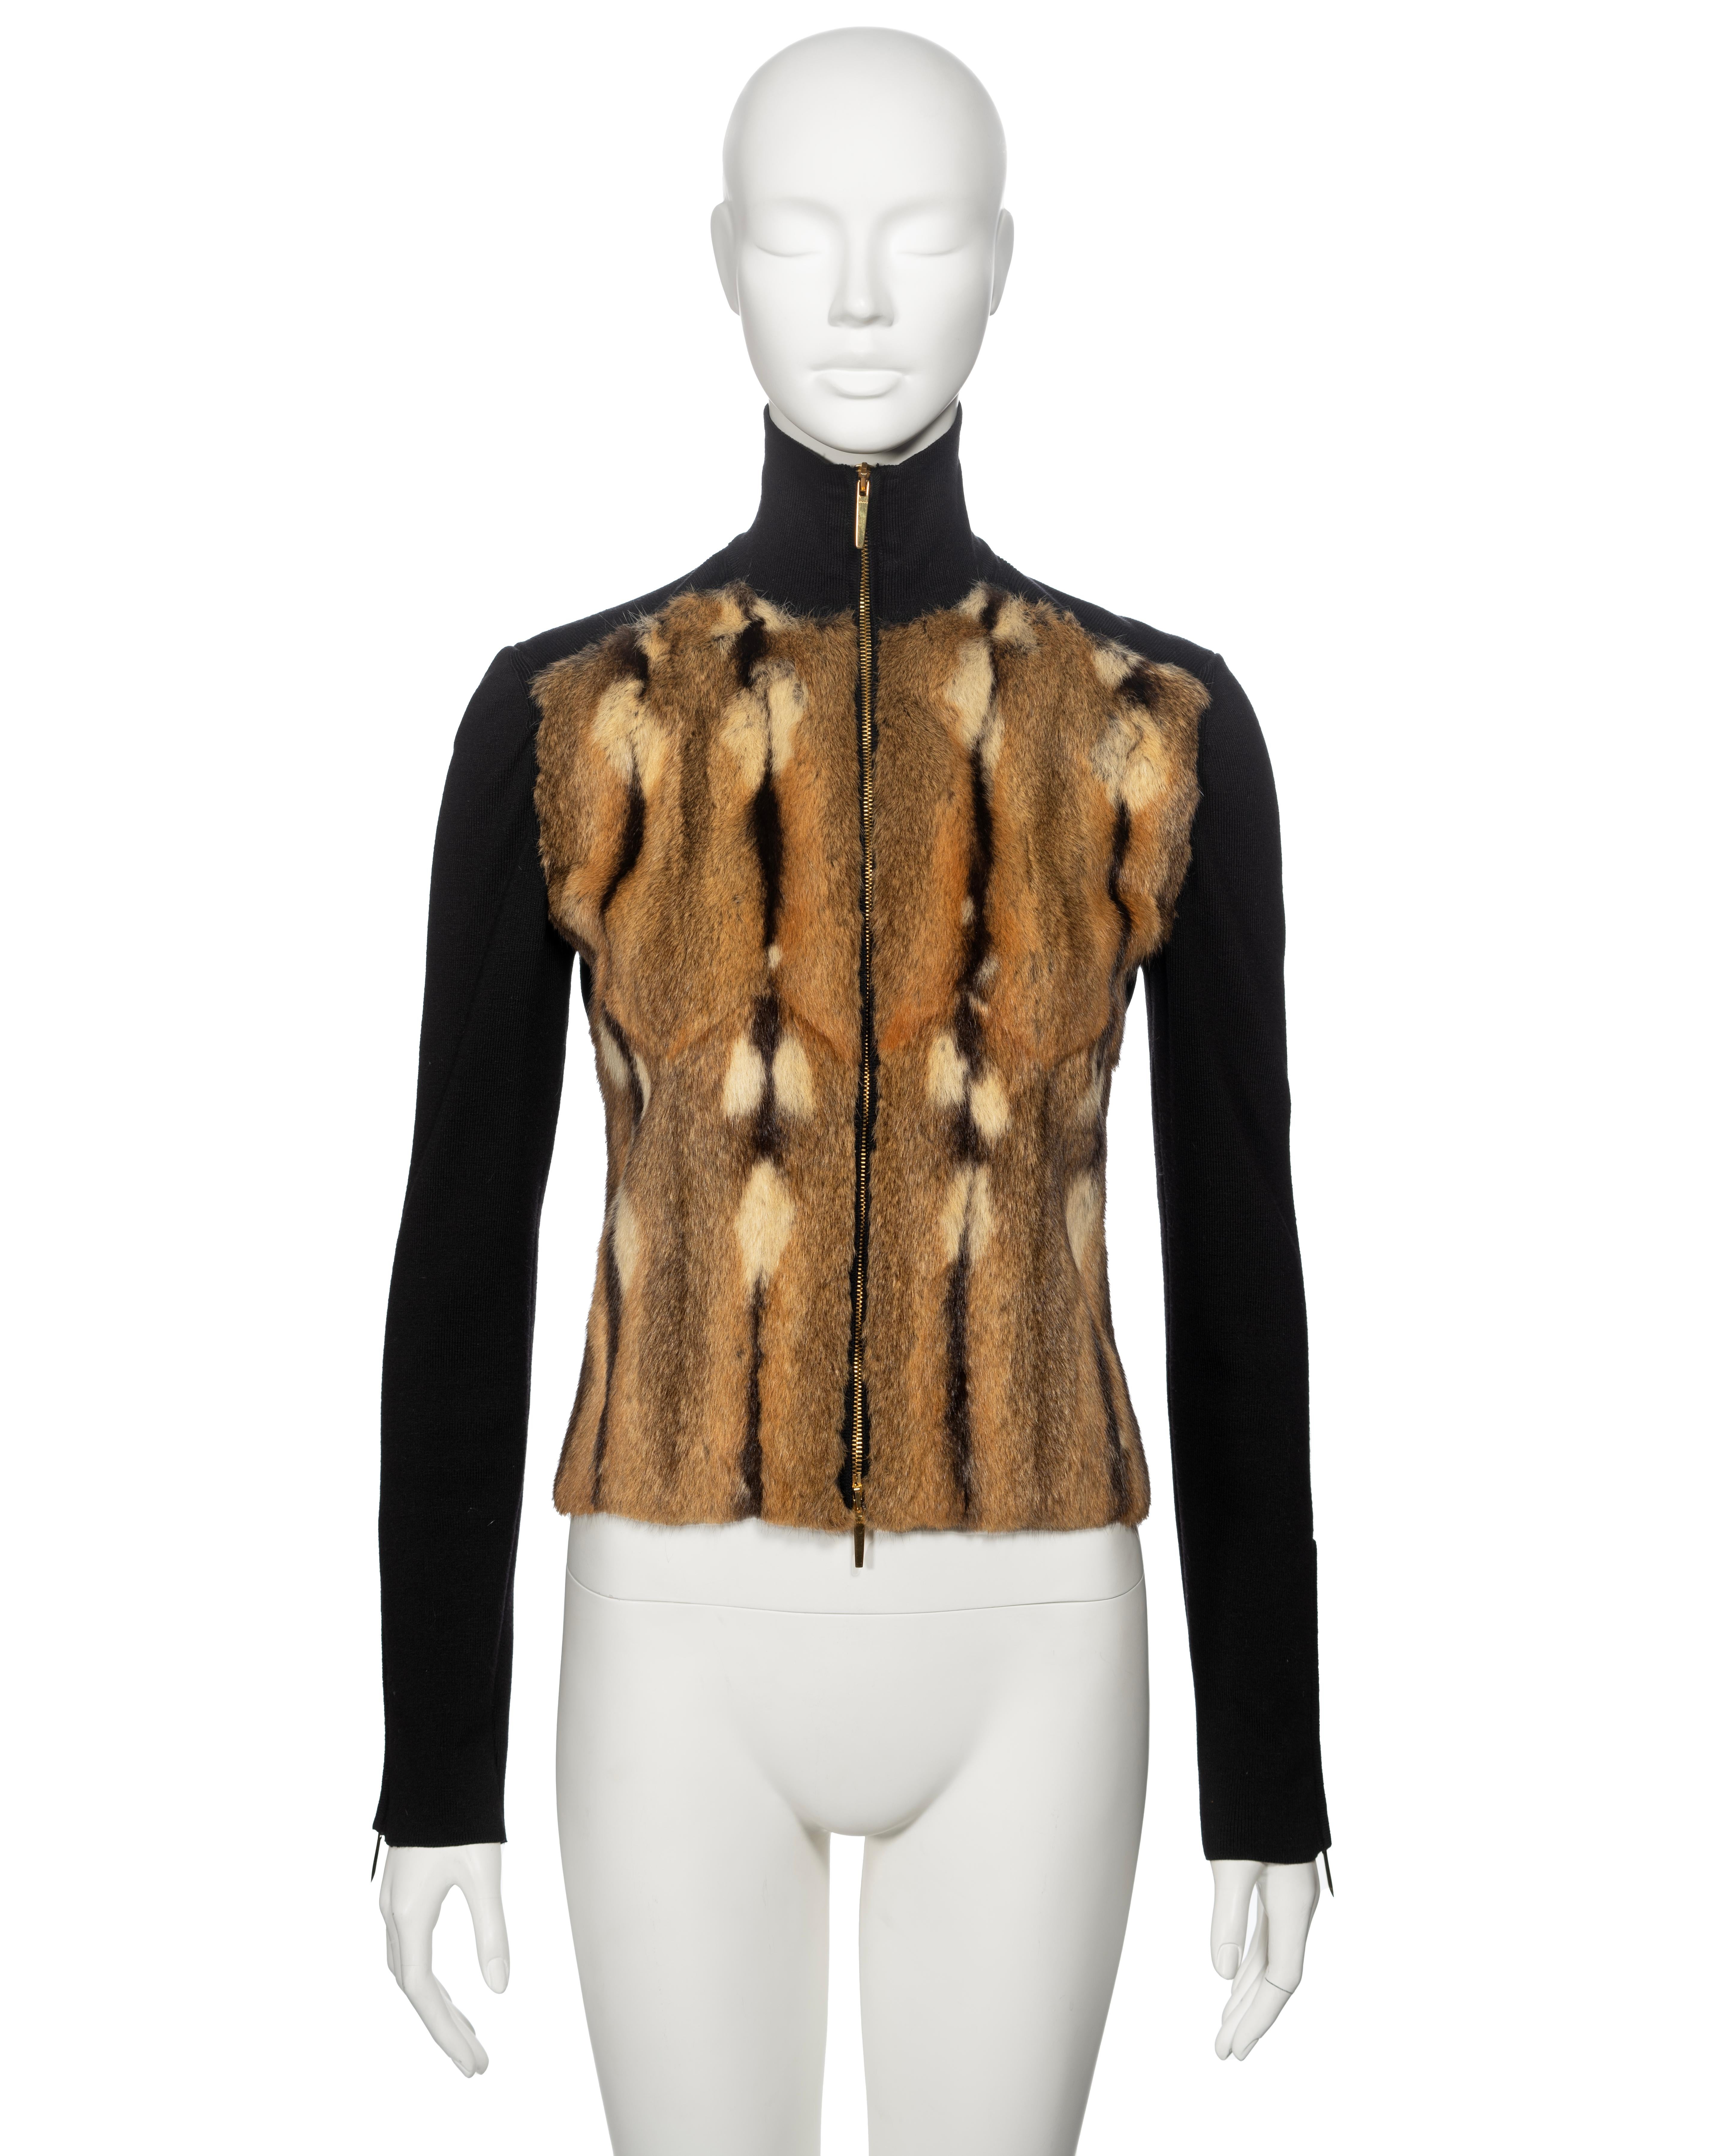 ▪ Gucci Fur Trapper Hat 
▪ Creative Director: Tom Ford 
▪ Fall-Winter 2000
▪ Brindled multi-tone fur 
▪ Black rib knit sleeves, turtleneck and back panel 
▪ Two-way gold-tone metal zipper with 'Gucci' engraved pulls 
▪ Size: Extra Small 
▪ Made in